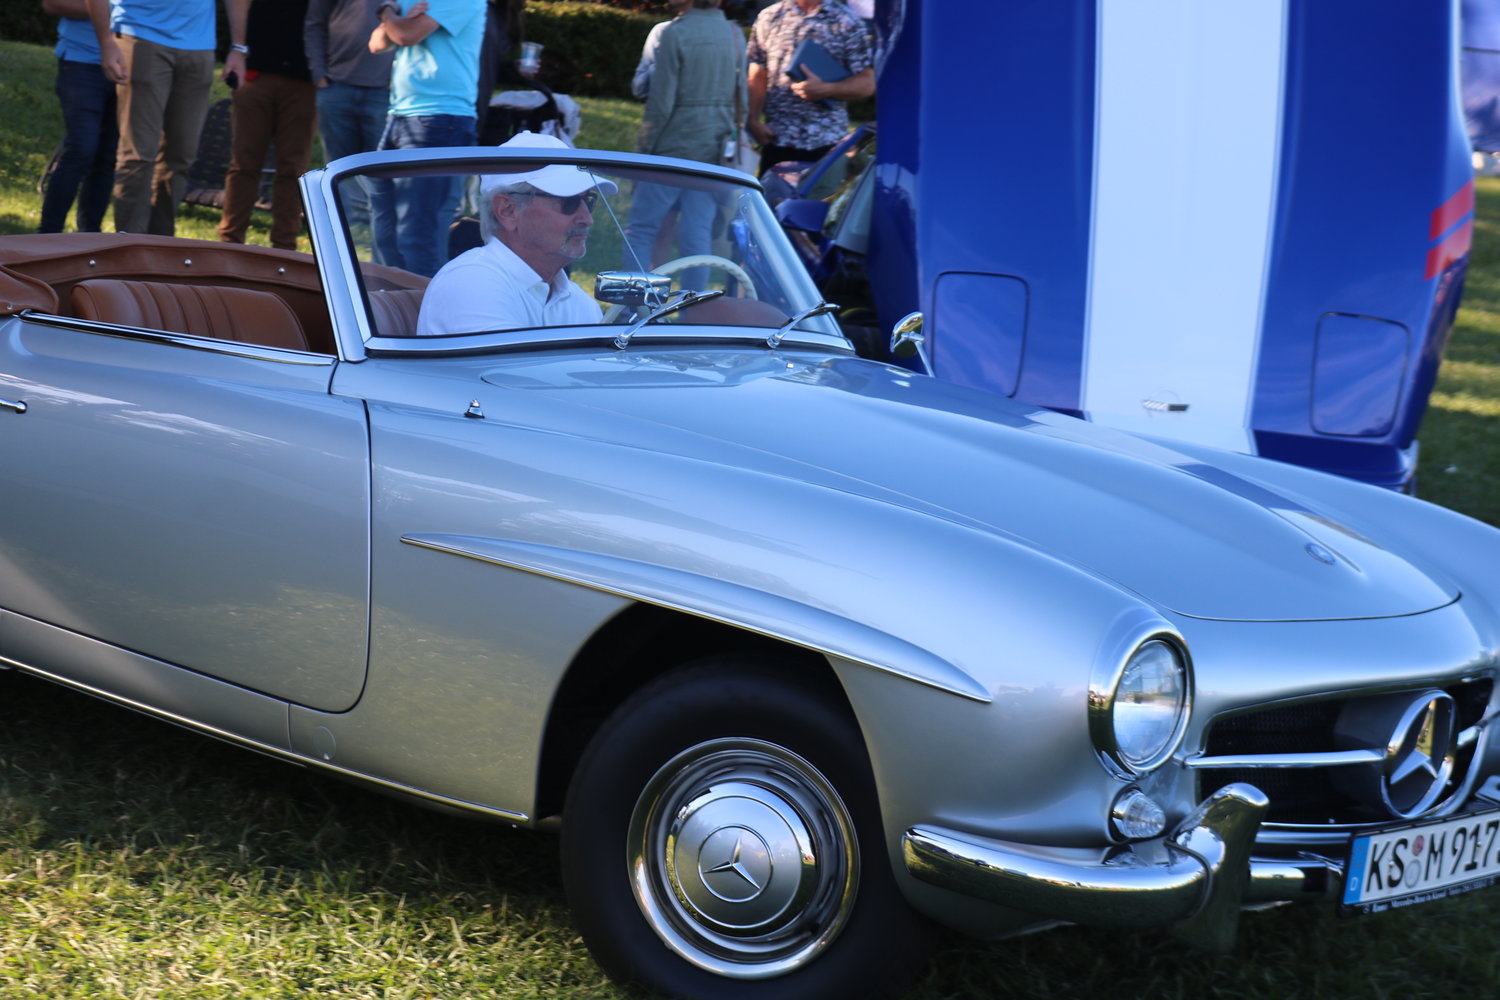 Sam Joiner behind the wheel of his 1961 Mercedes-Benz 190SL.